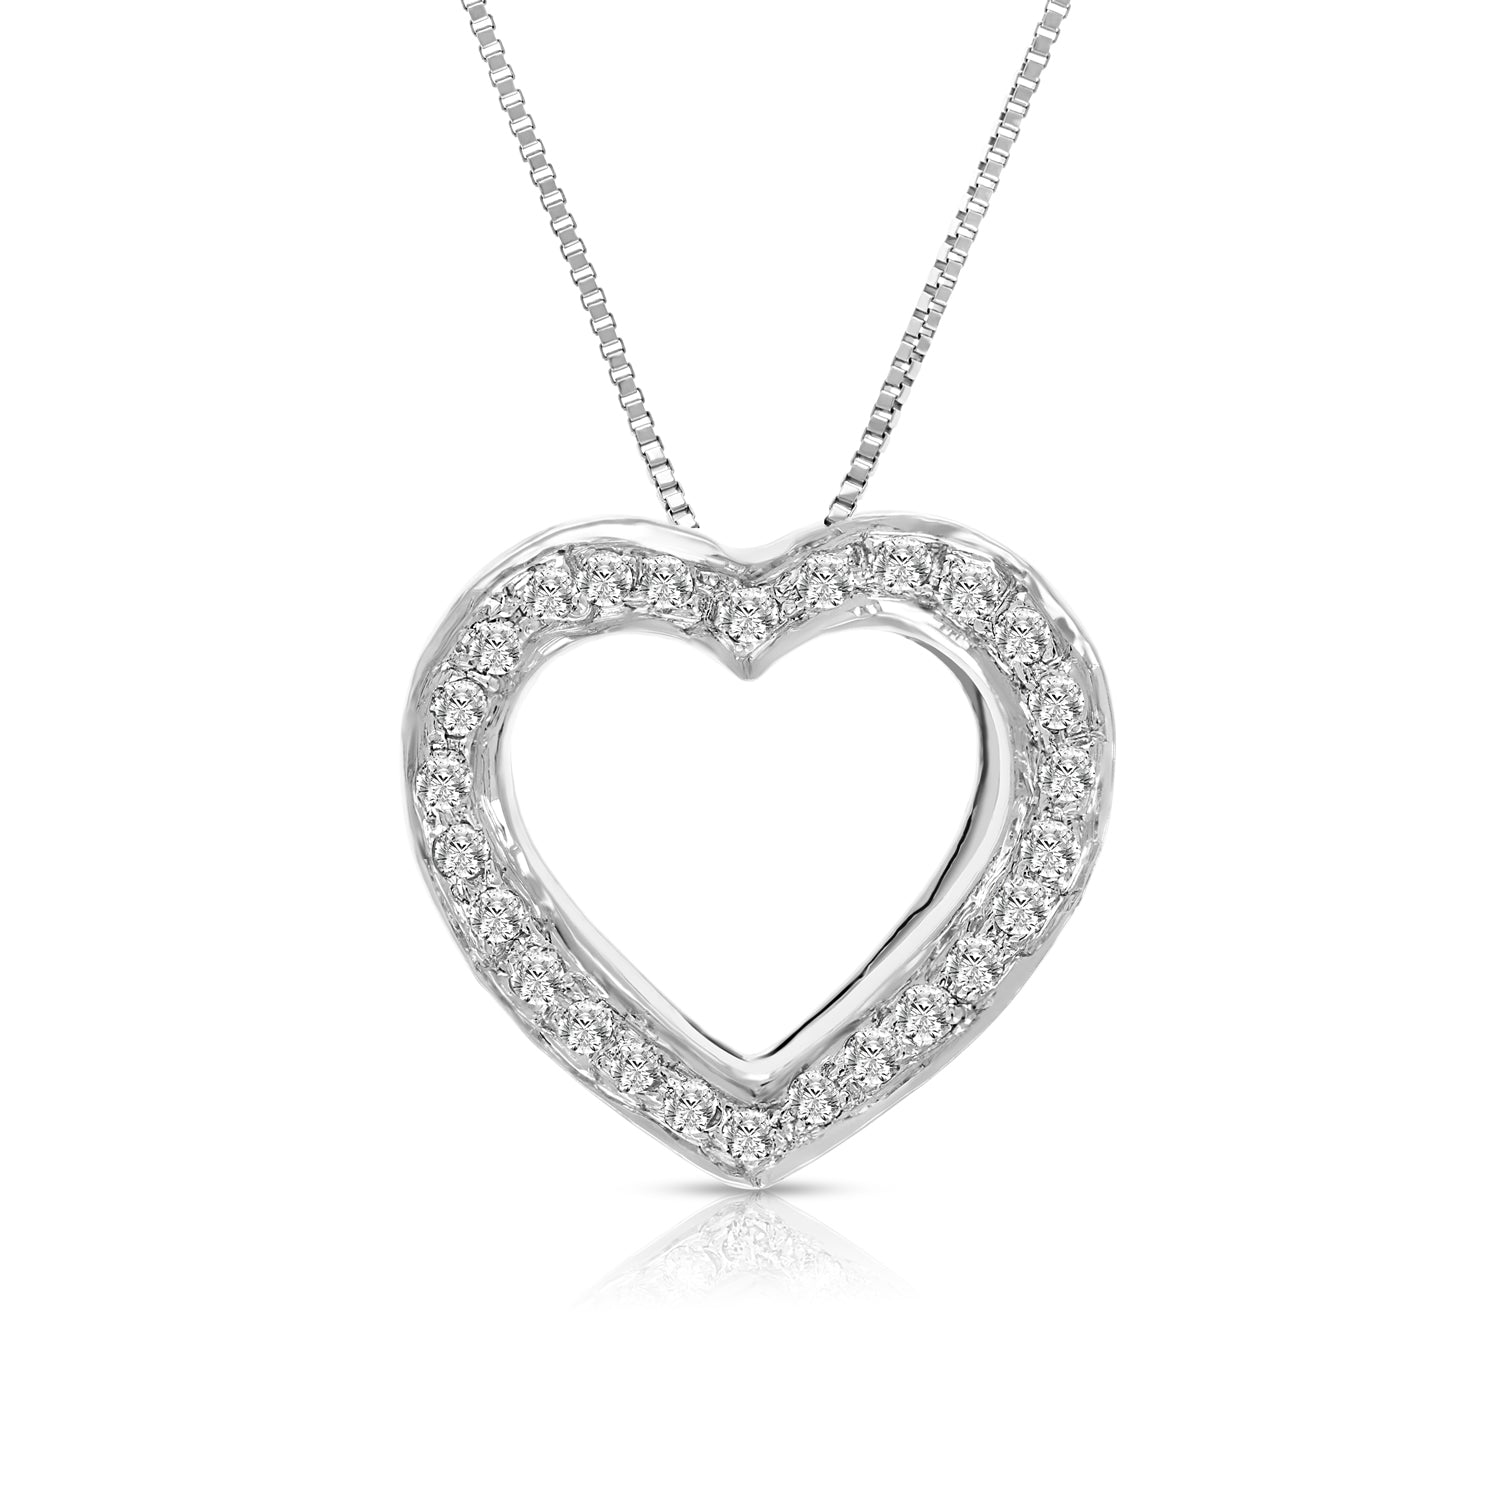 1/4 cttw Diamond Heart Pendant Necklace 14K White Gold with 18 Inch Chain